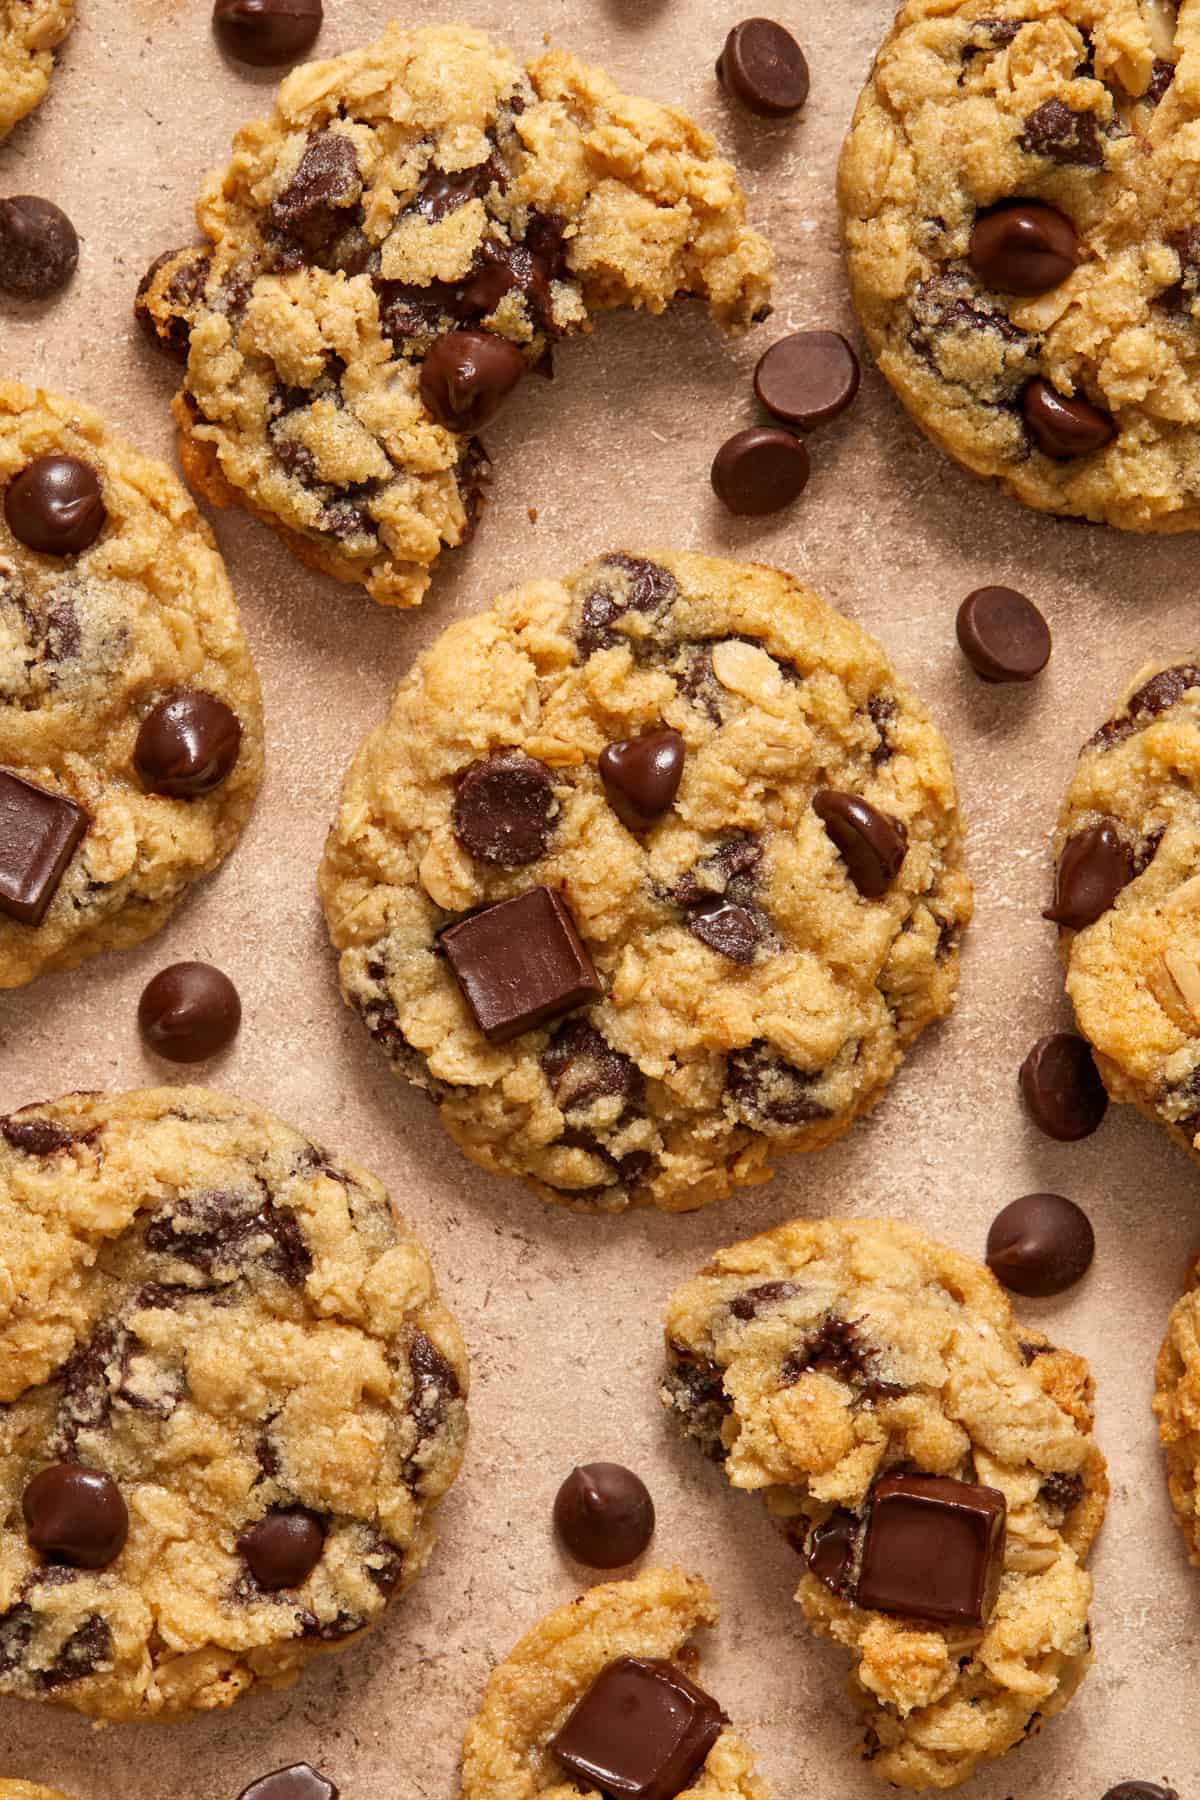 Oatmeal chocolate chip cookies arranged on surface with chocolate chips scattered.